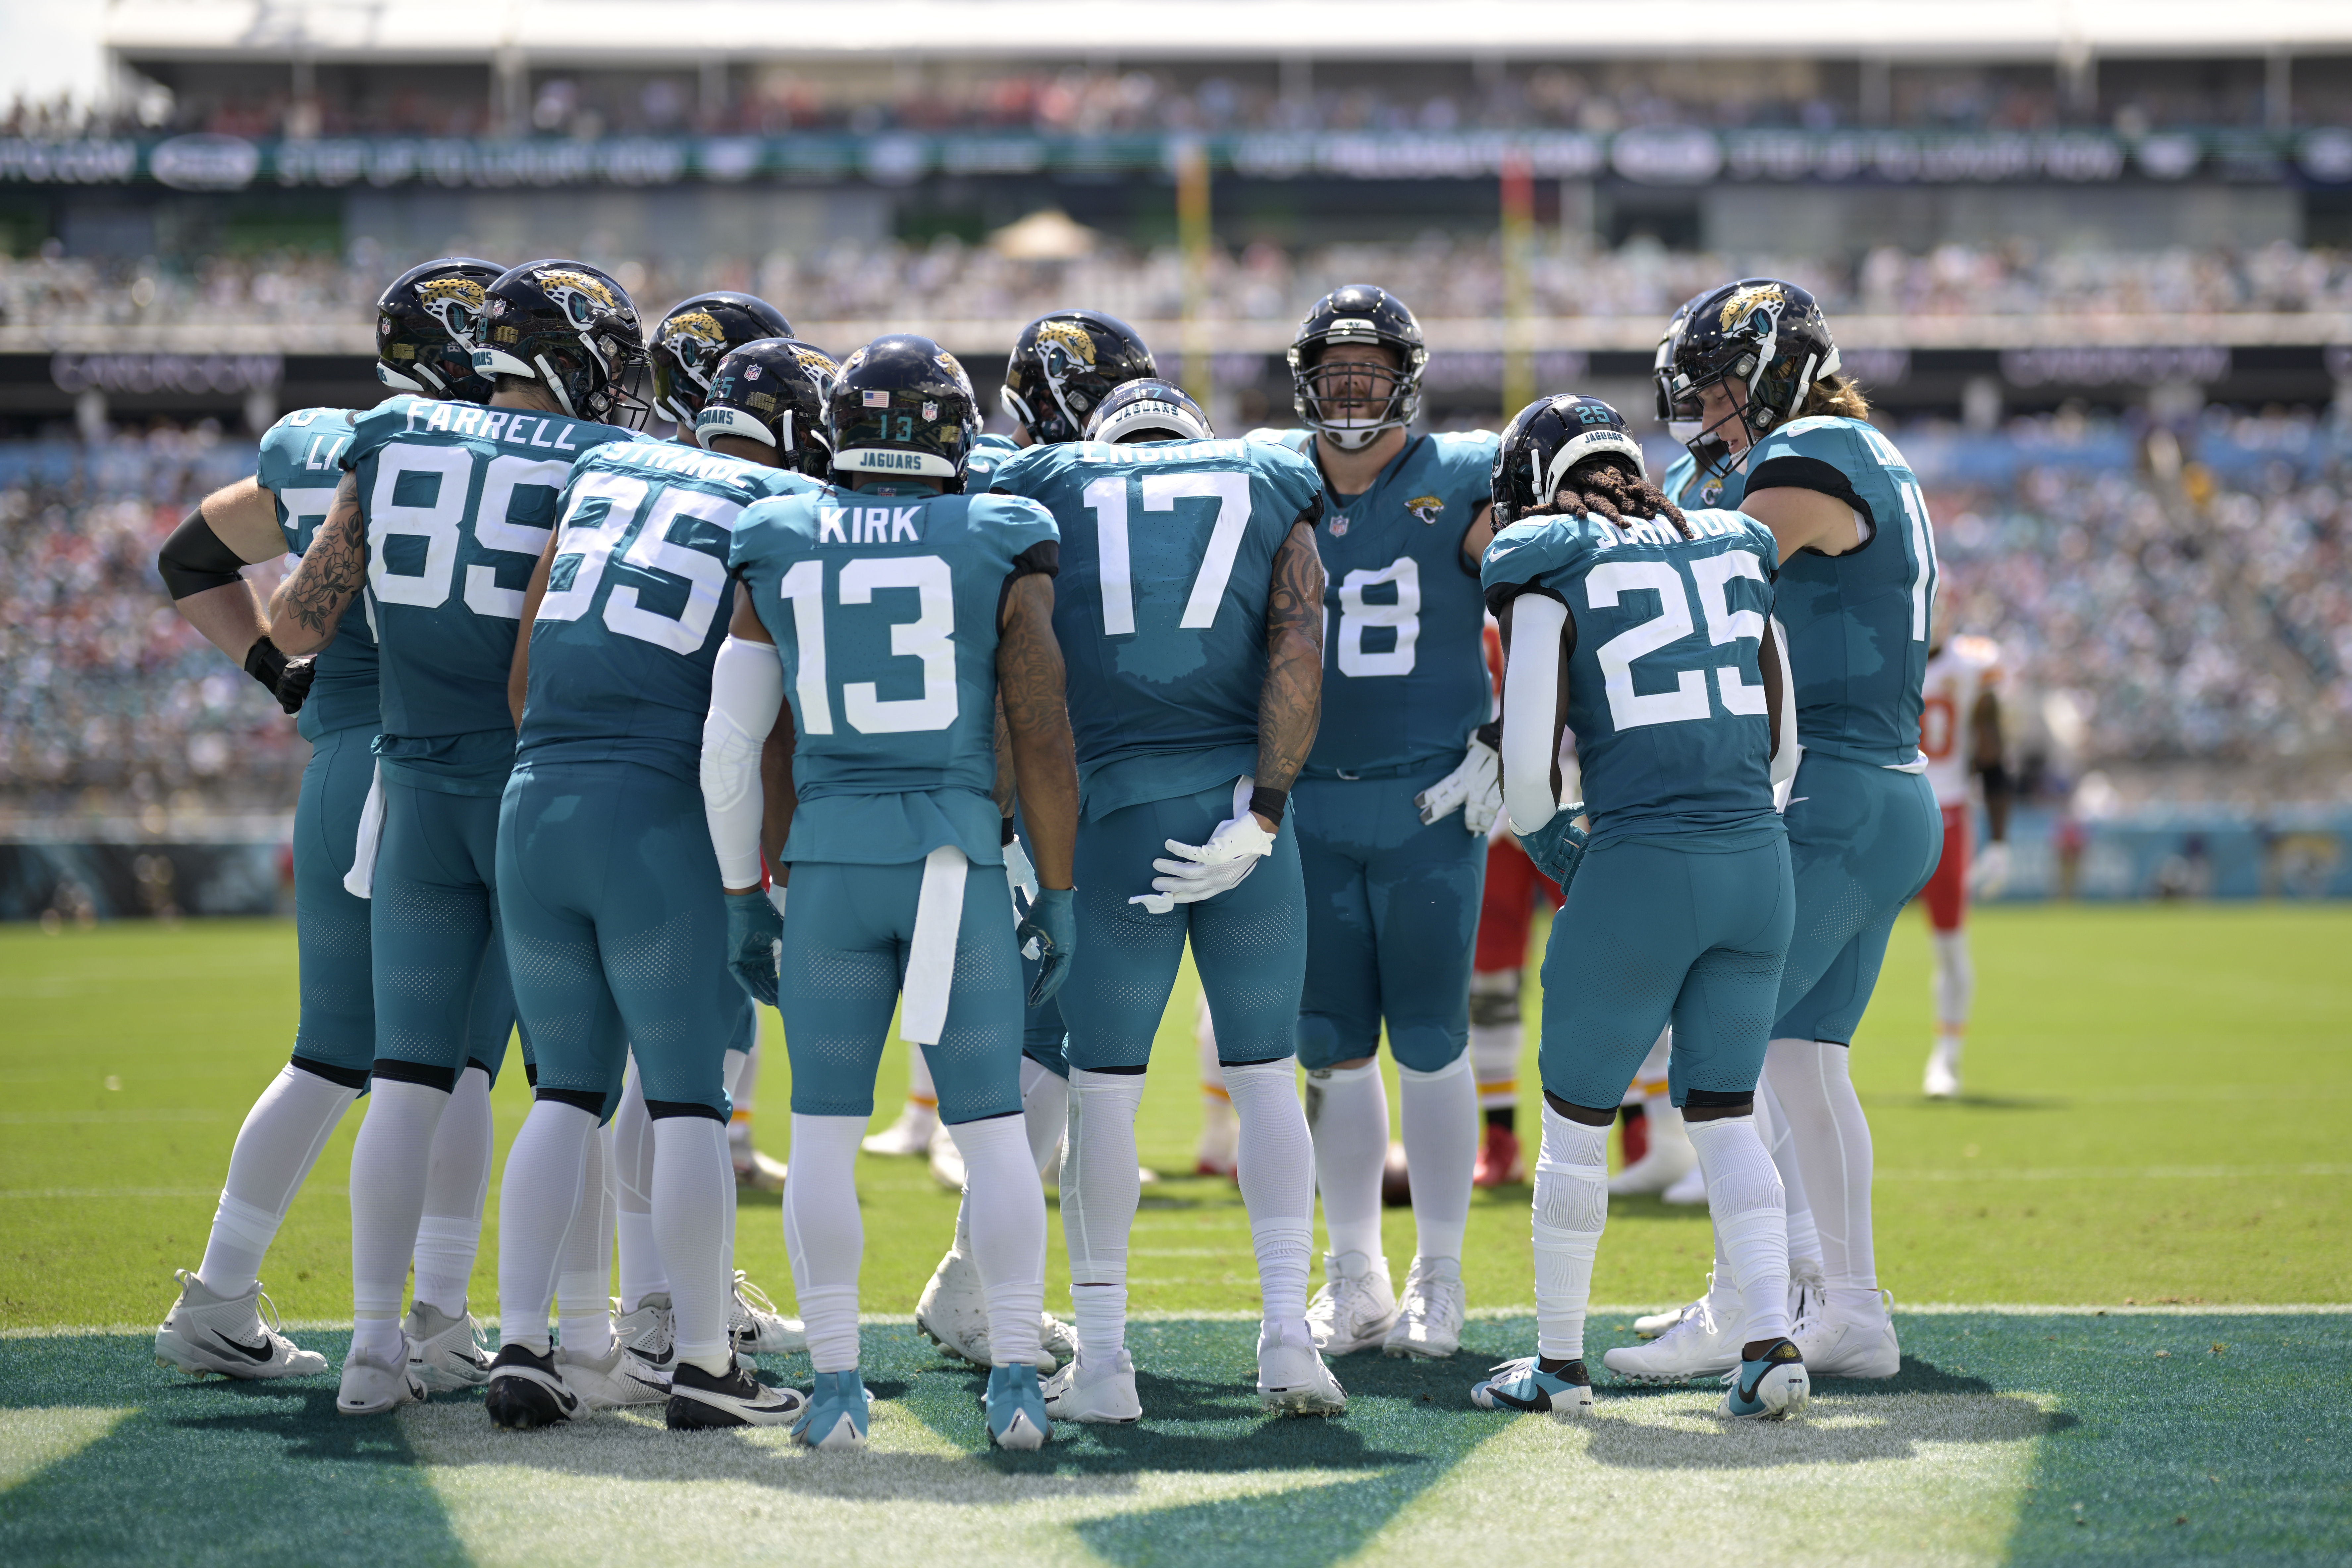 Watch Texans play Jaguars on TV, online, mobile device for free